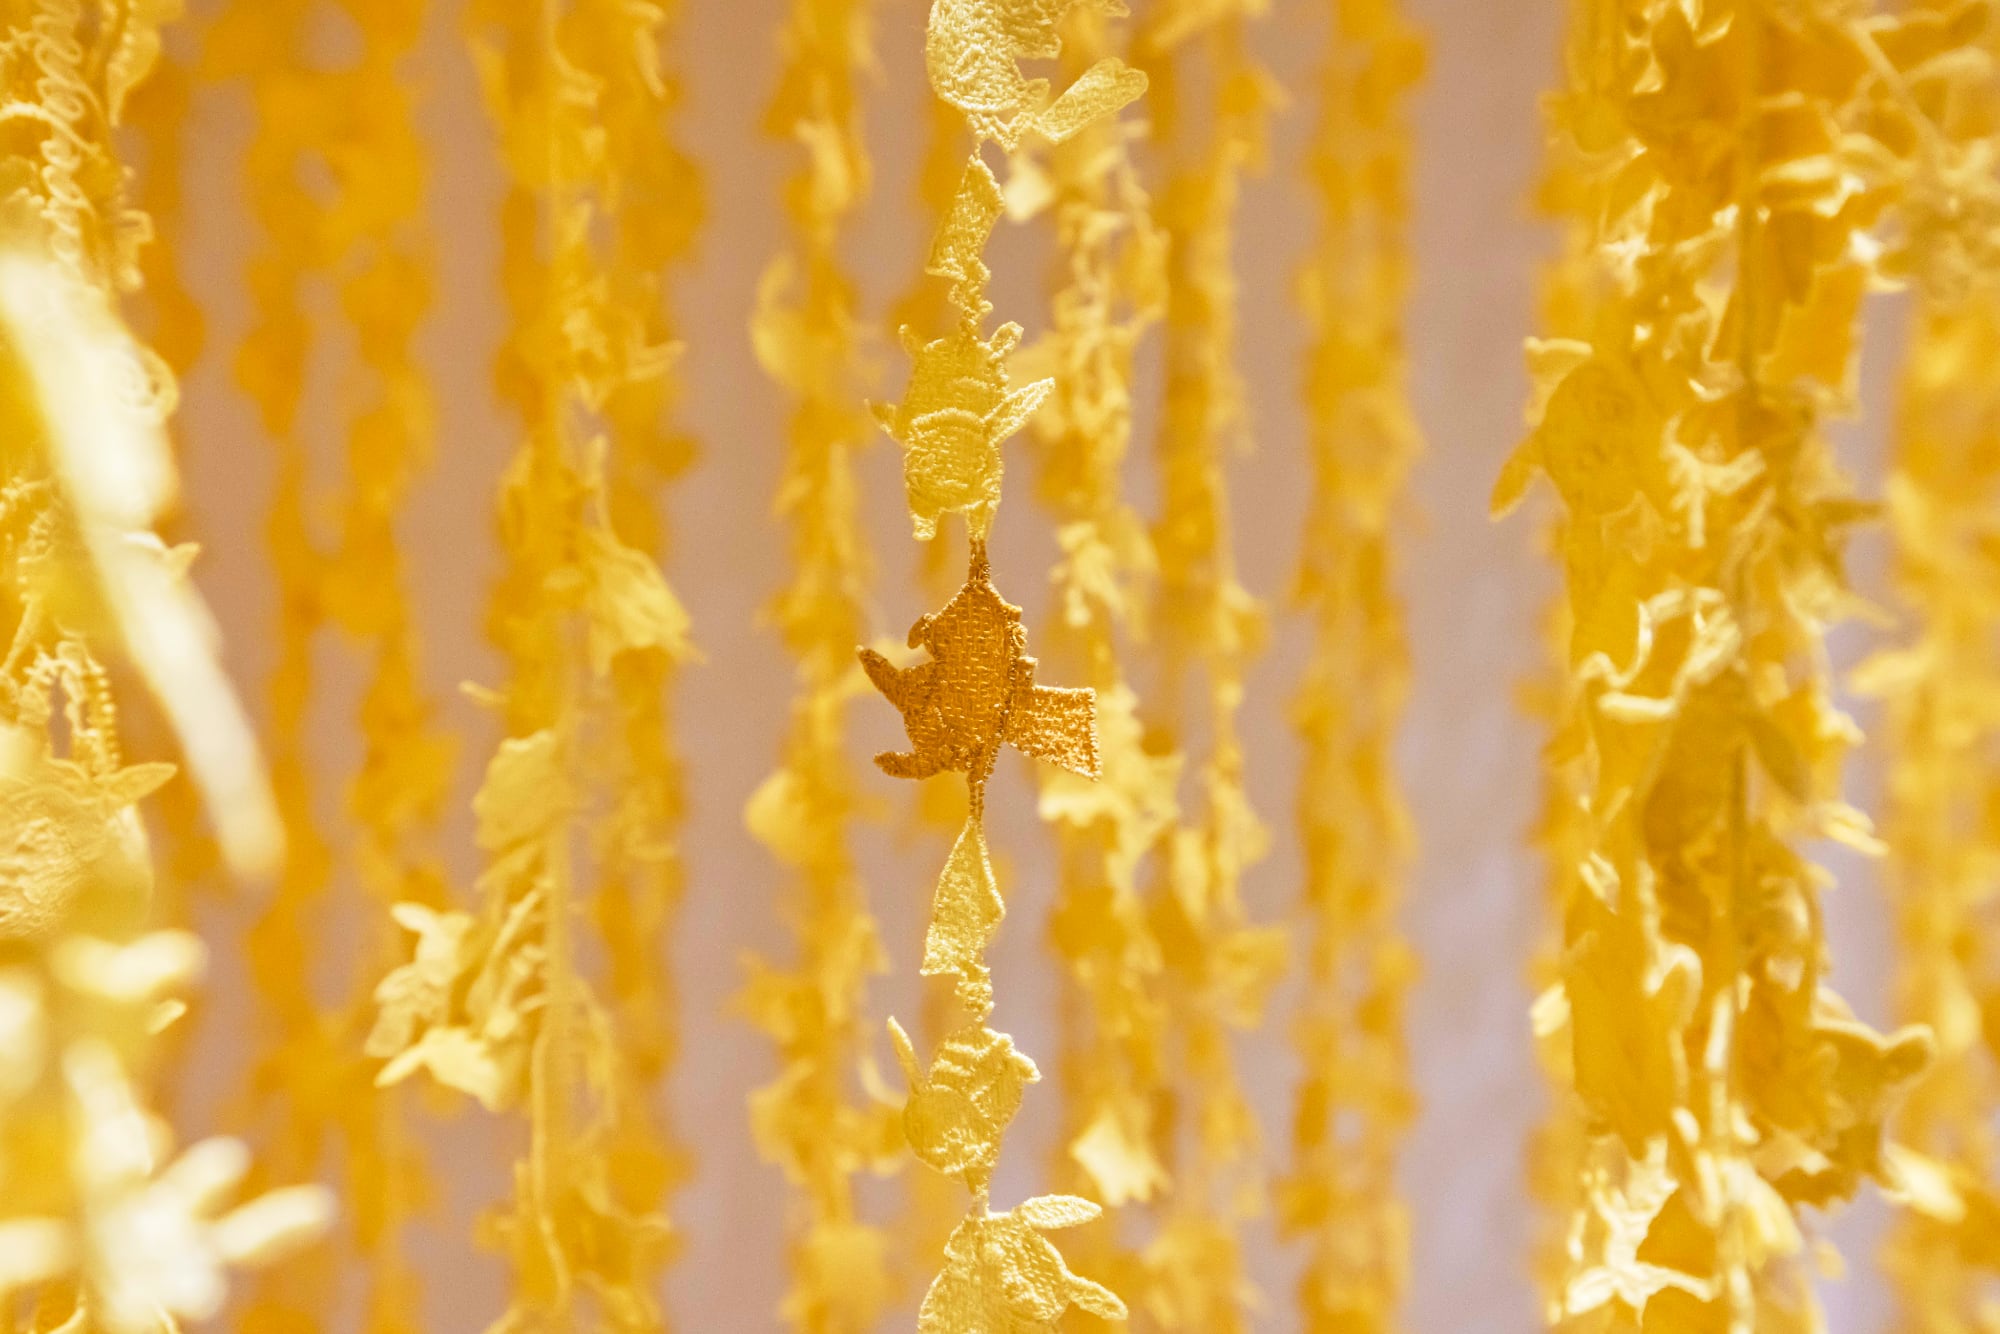 yellow tendrils made of pikachu-shaped pieces of fabric 